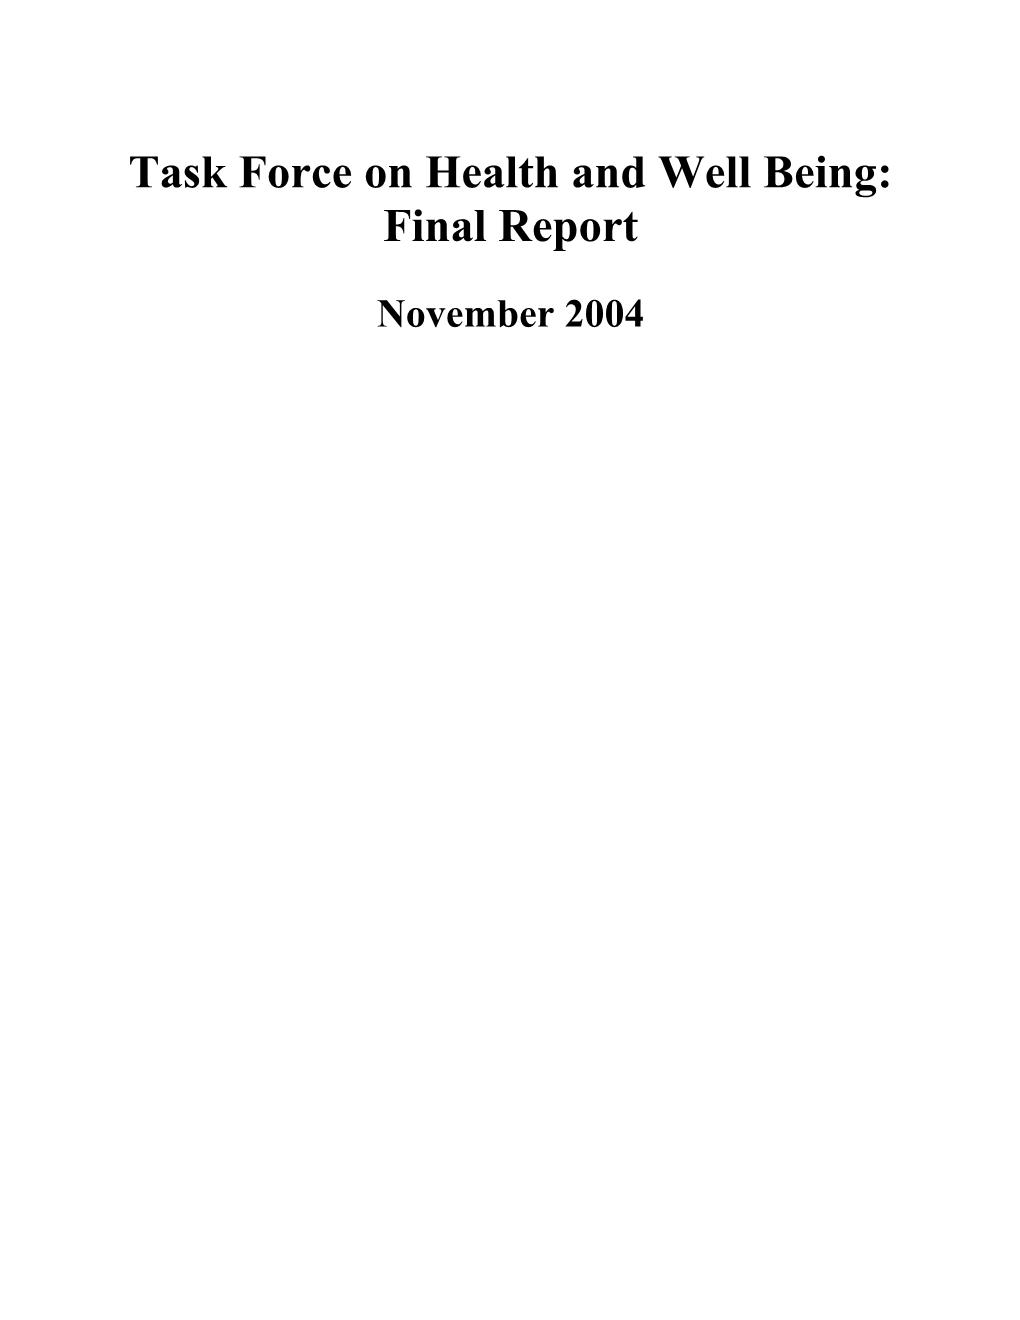 Task Force on Health and Well Being: Final Report